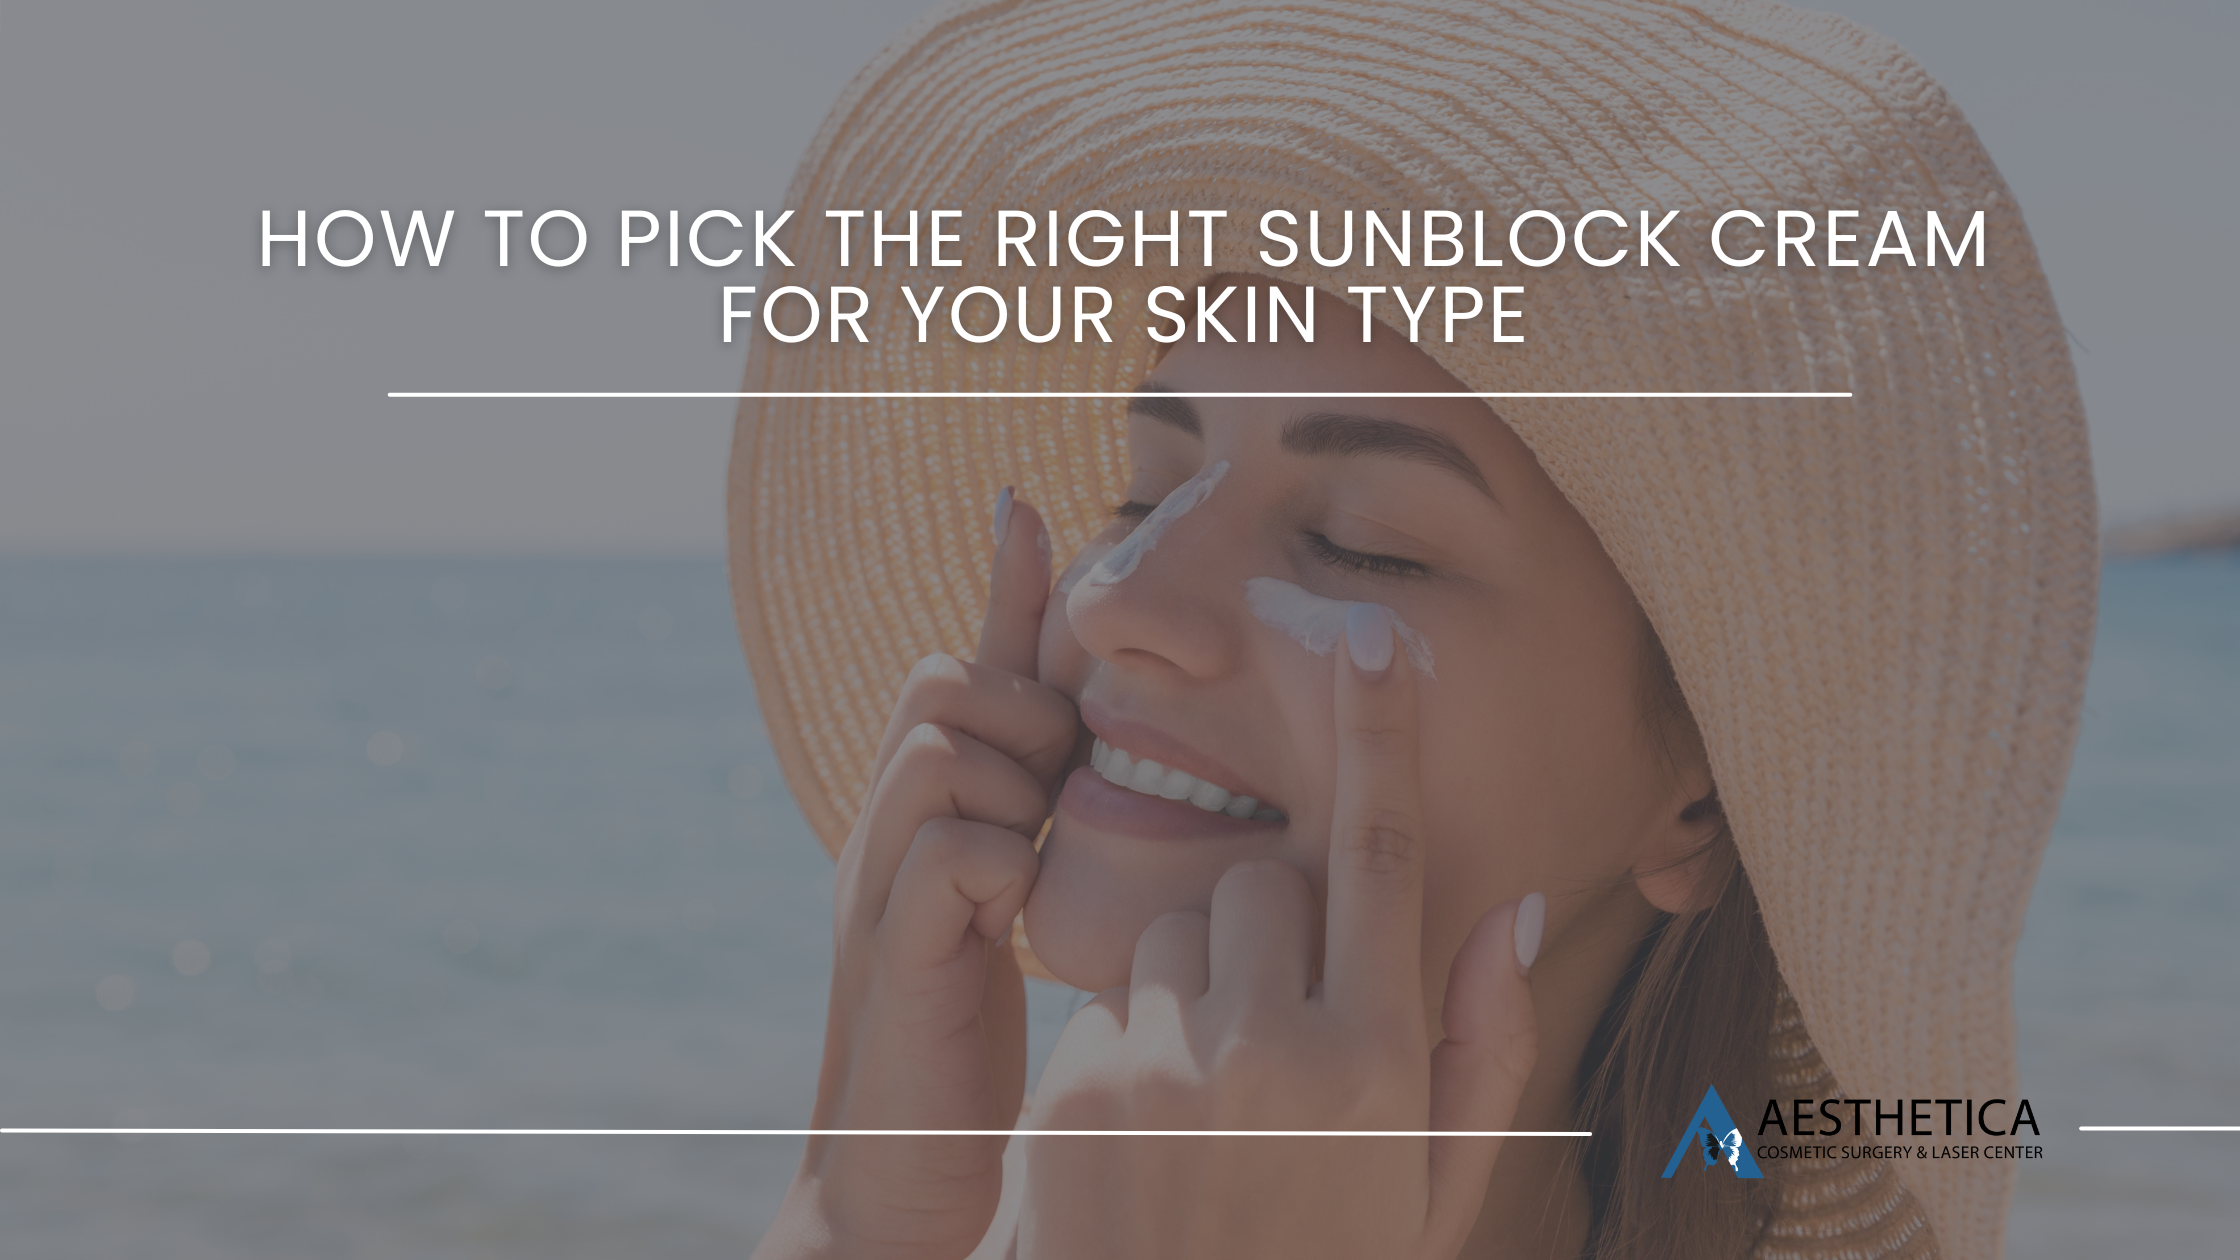 How to Pick The Right Sunblock Cream for Your Skin Type